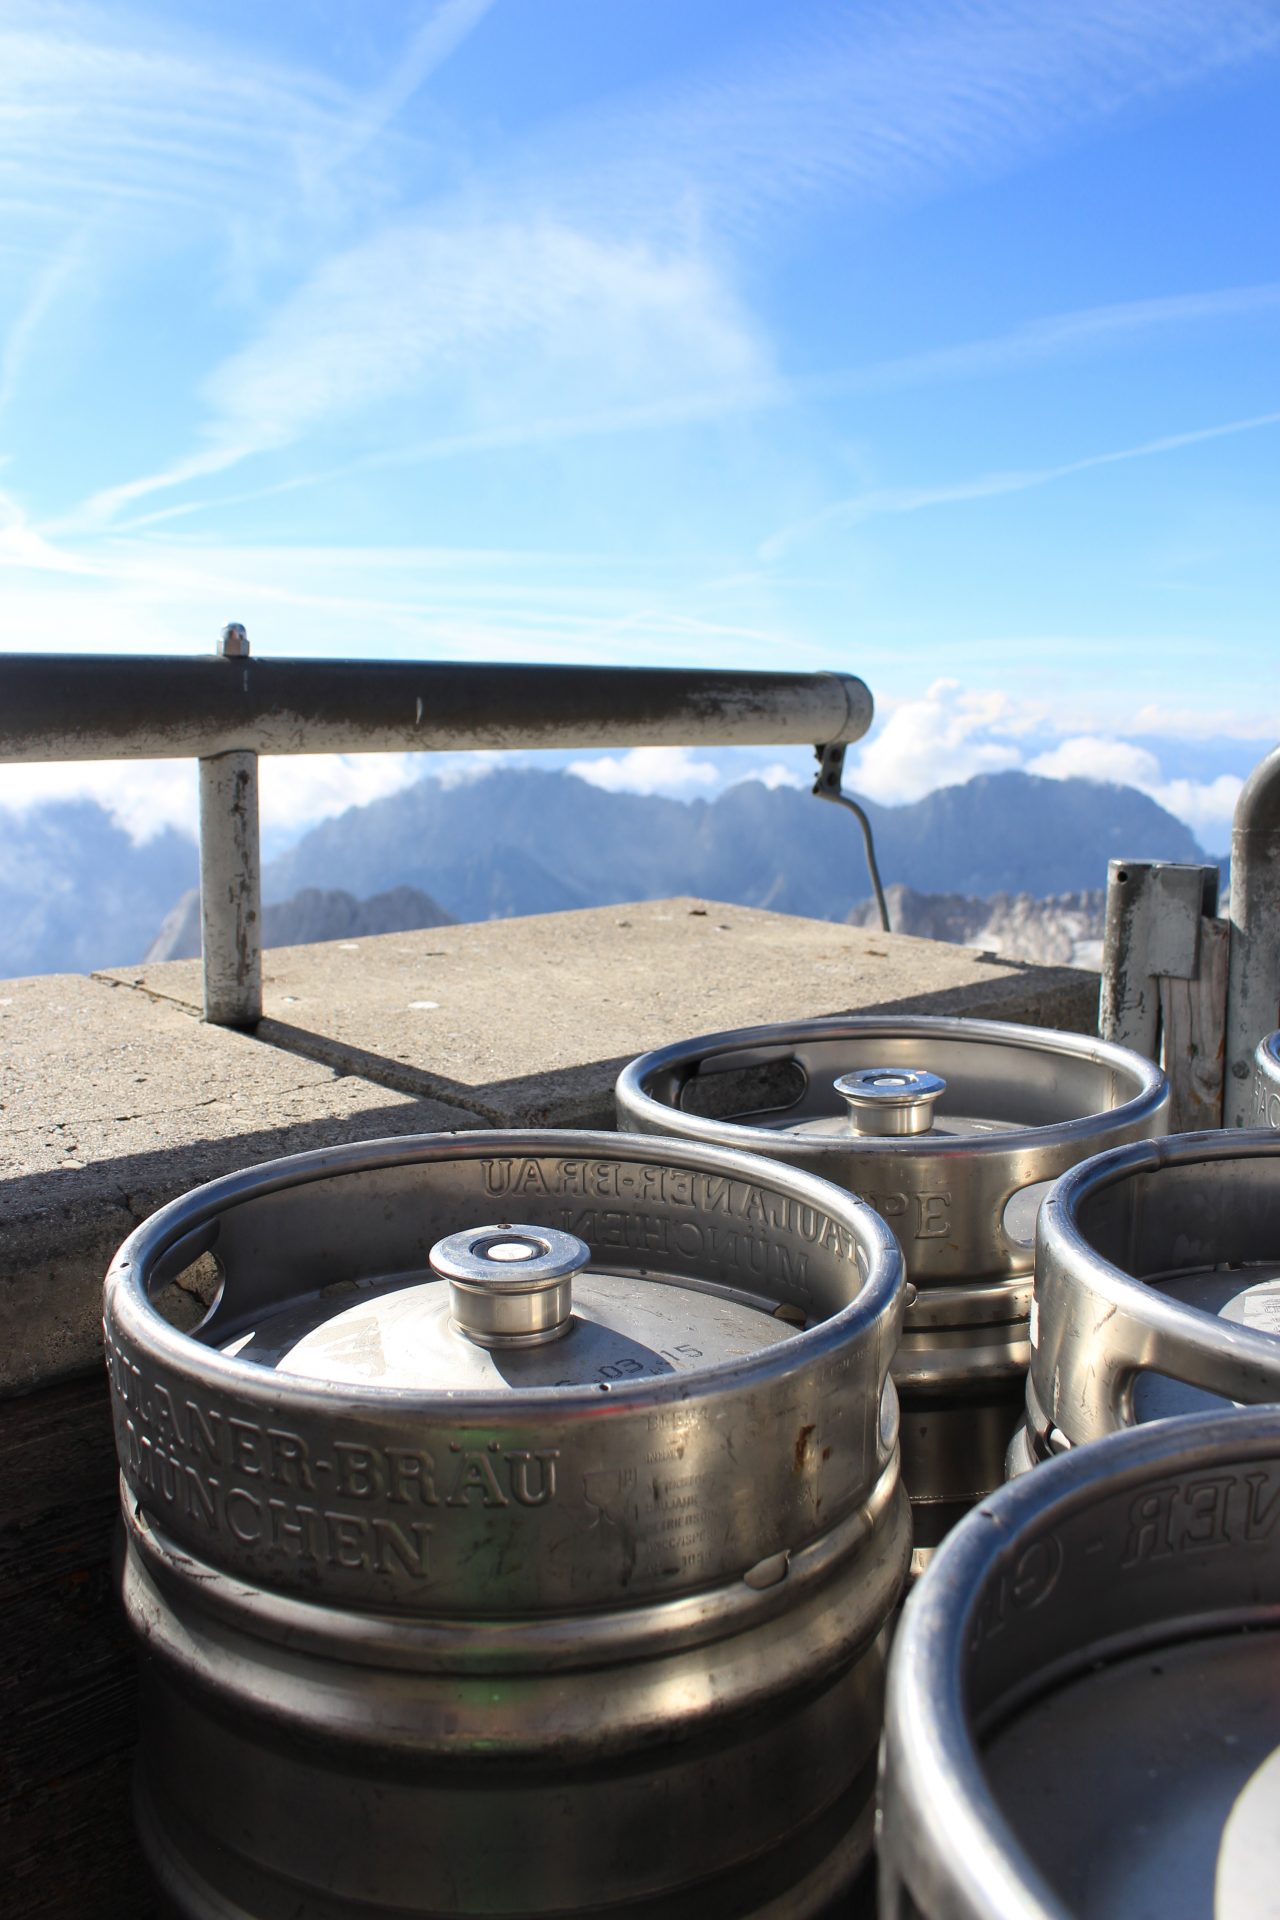 zugspitze beer garden - A trip to Germany - Overview